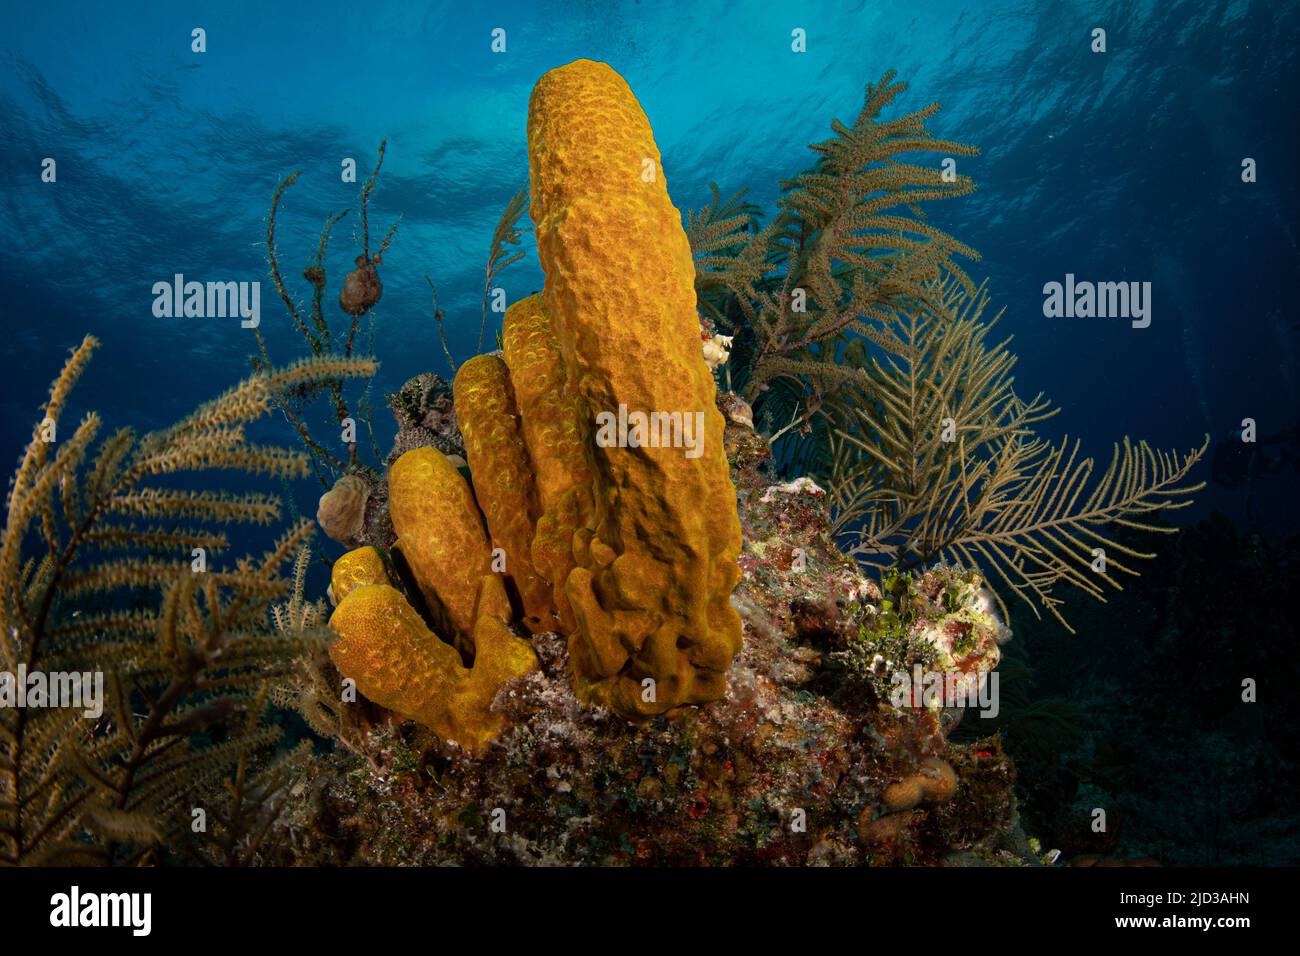 Branching tube sponge (Pseudoceratina crassa) at dawn on the G-Spot divesite off the island of French Cay, Turks and Caicos Islands Stock Photo